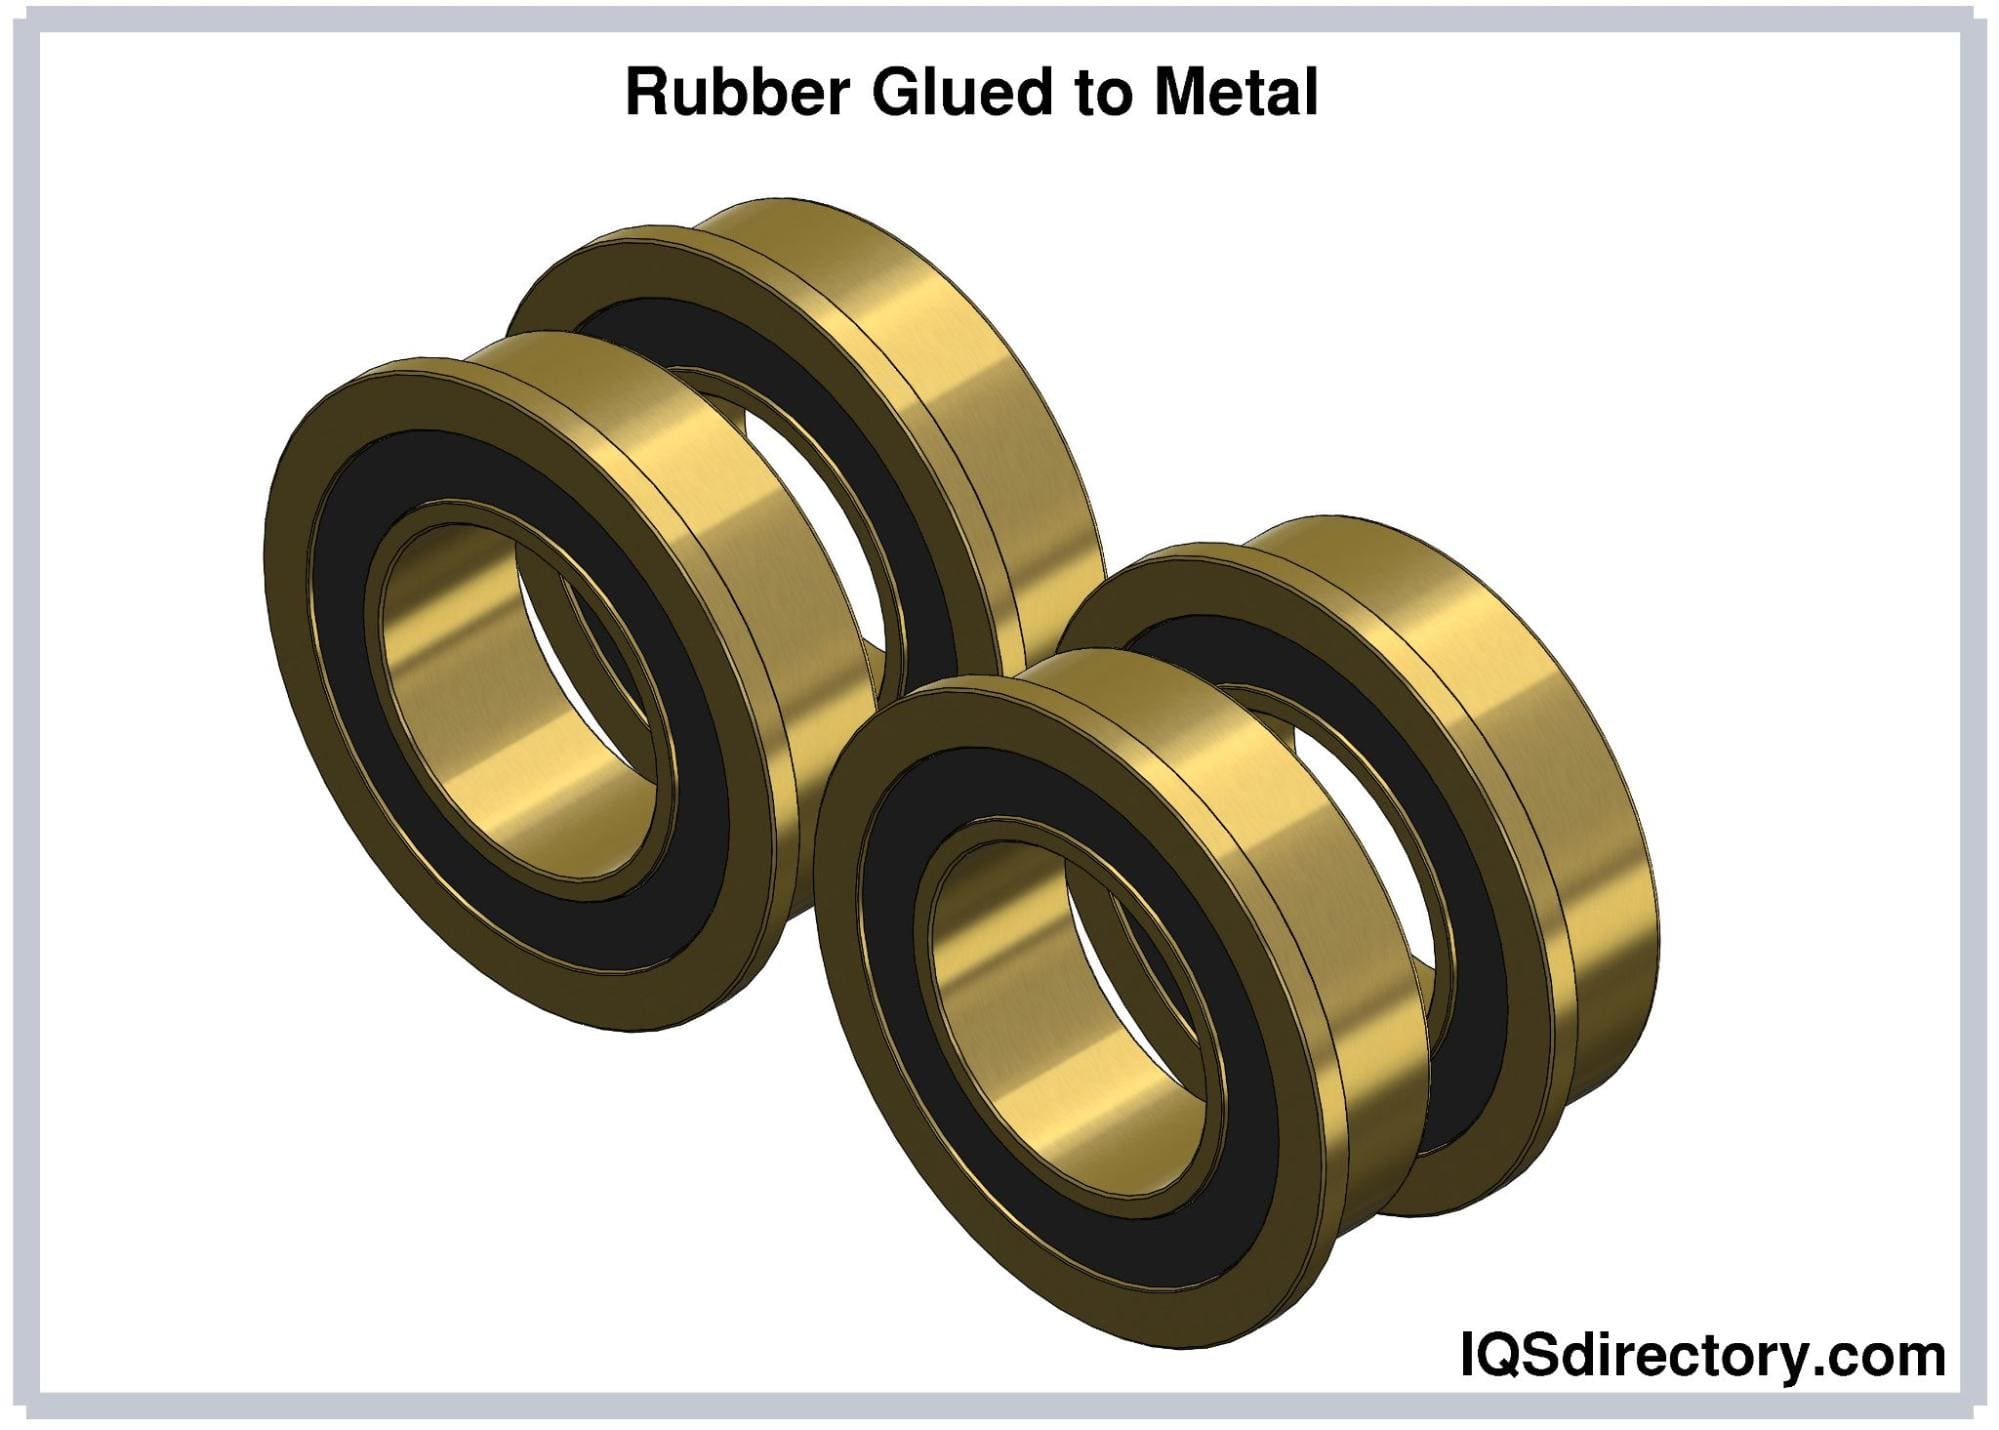 Rubber to Metal Bonding: Products, Applications, Benefits, and Process